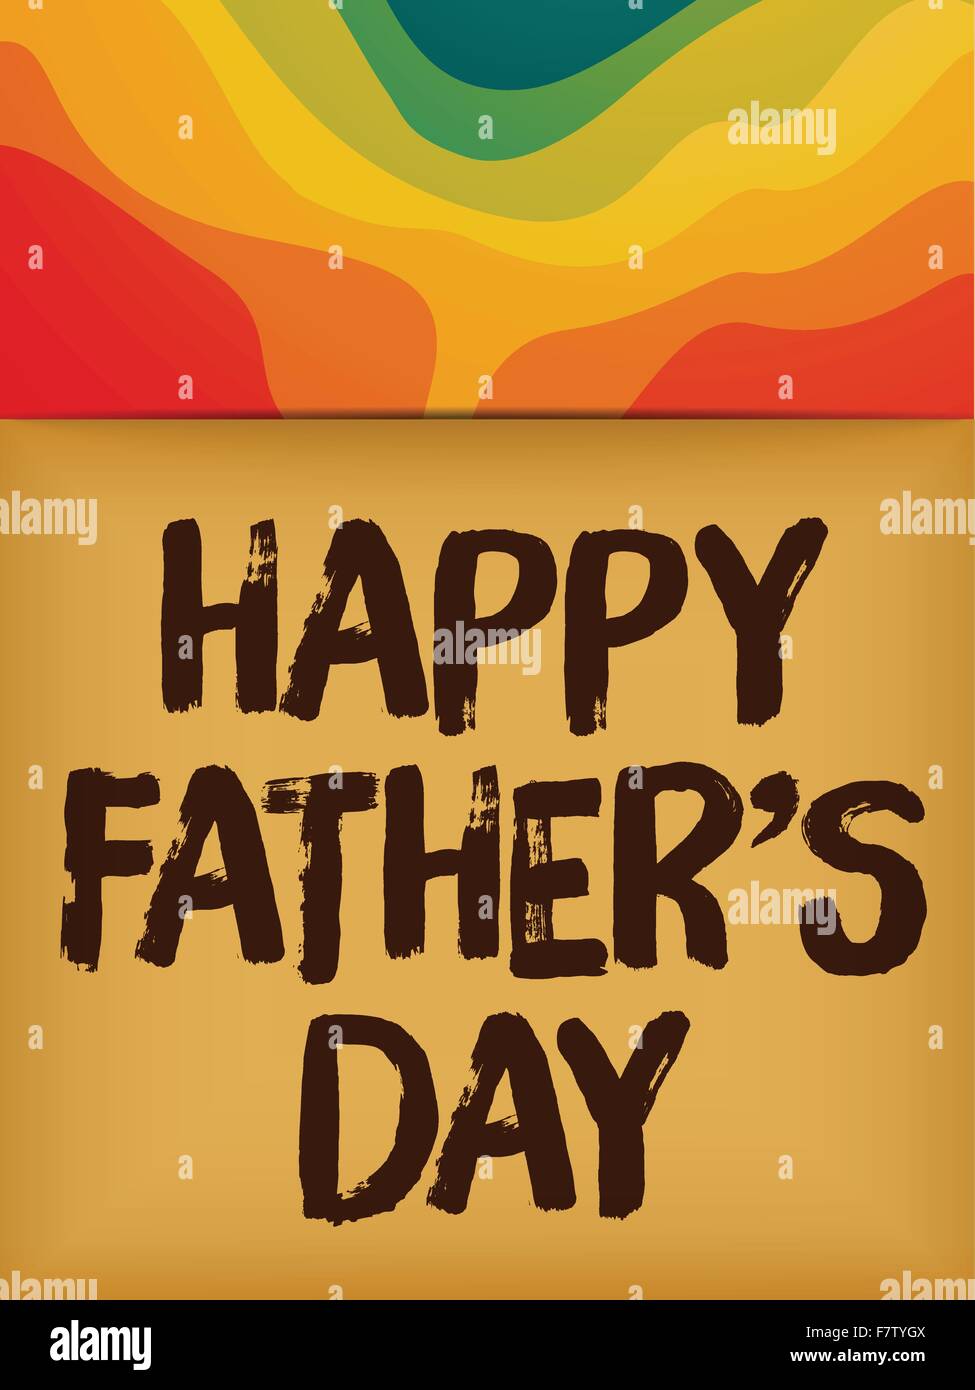 Happy Fathers Day Colorful Background Card Stock Vector